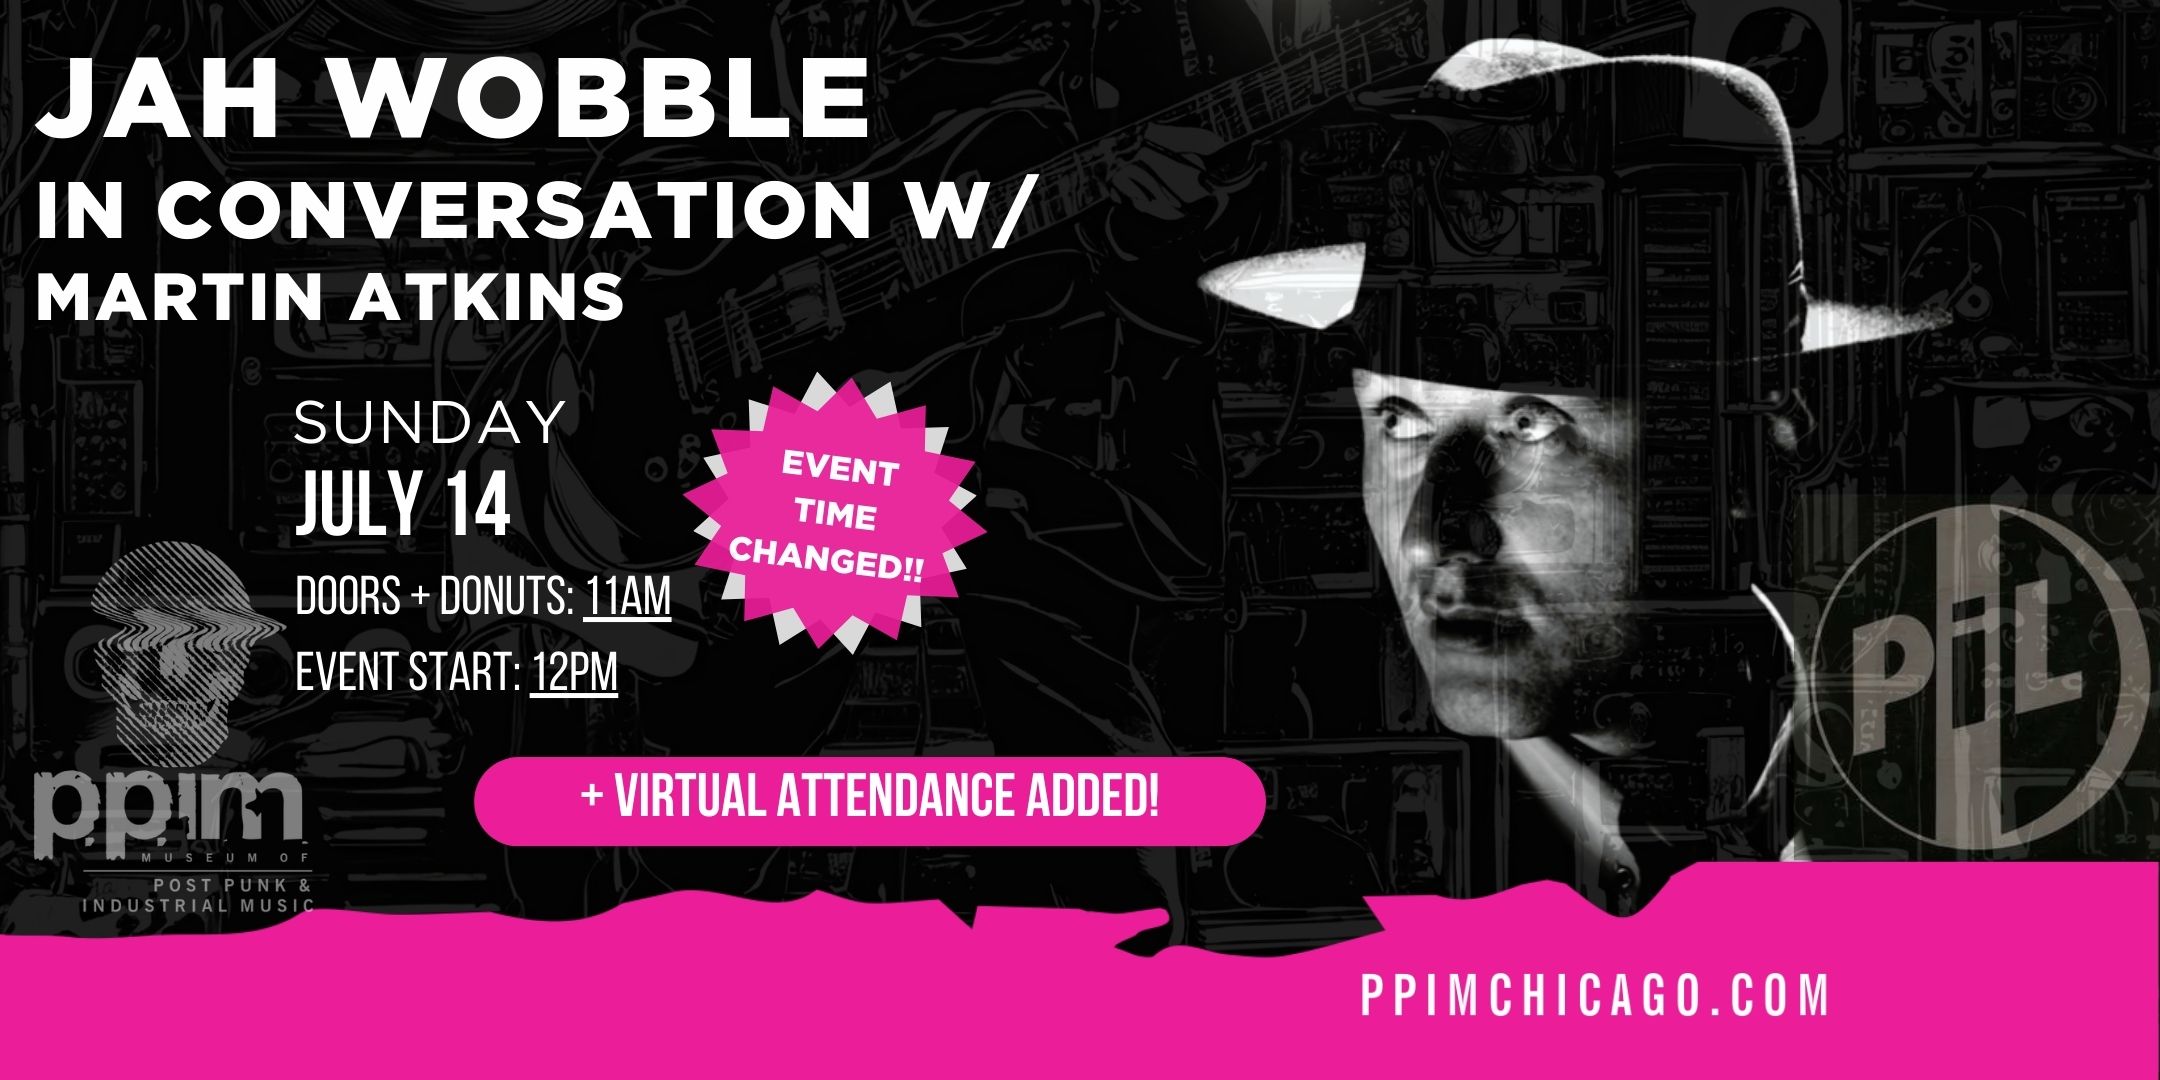 Jah Wobble at PPIM Event Time Changed + Virtual Added!